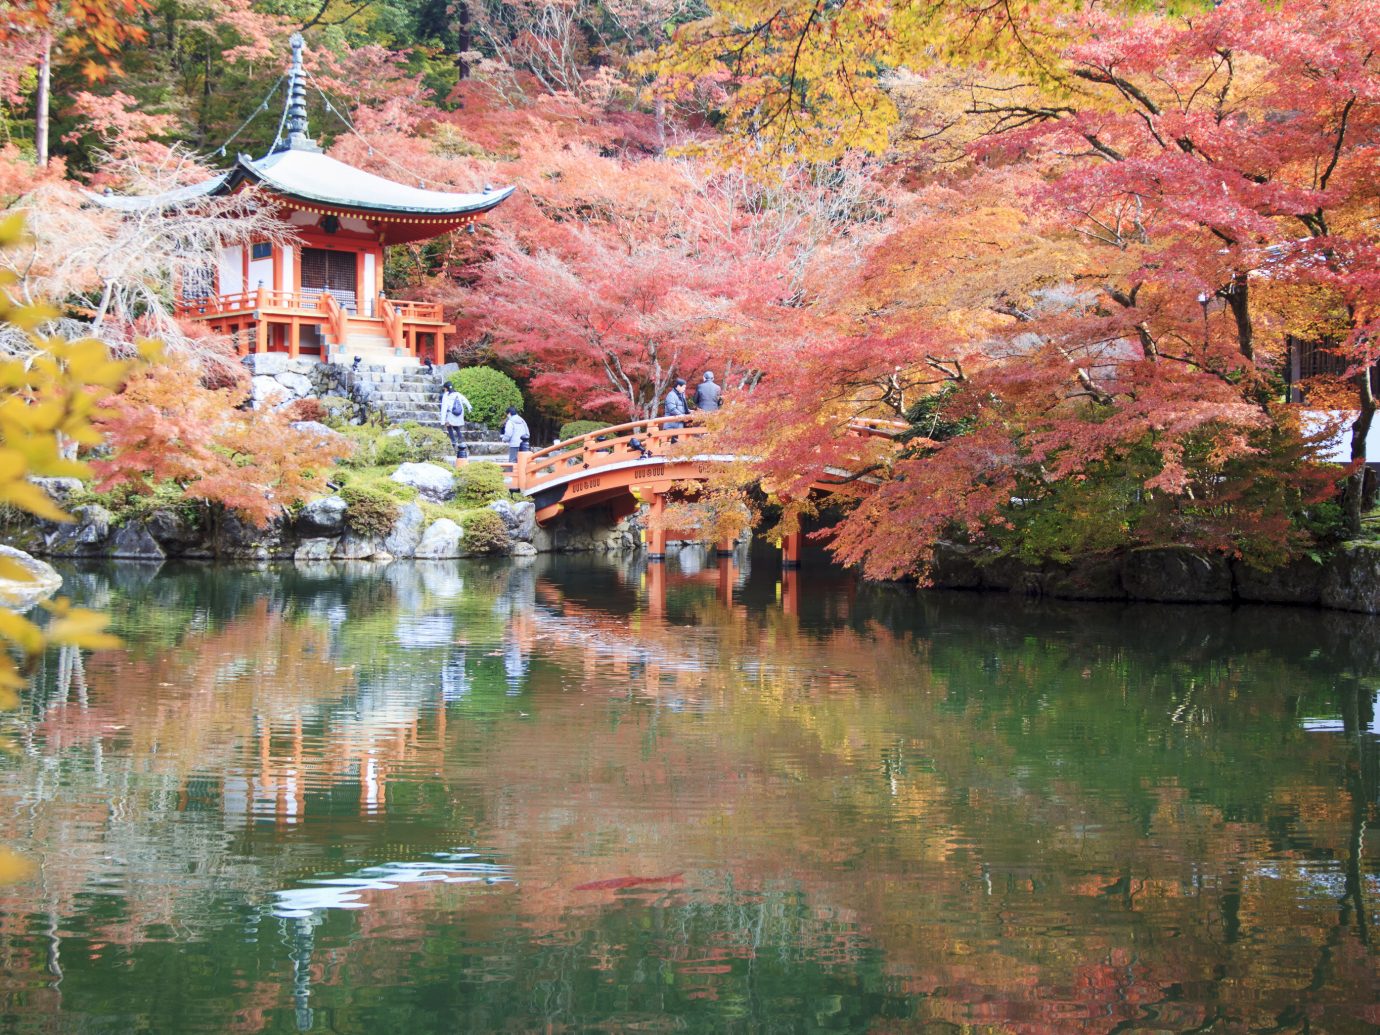 Trip Ideas outdoor tree Nature reflection water plant leaf autumn waterway pond pagoda spring maple tree flower cherry blossom tourist attraction watercourse landscape bank branch Lake temple surrounded area